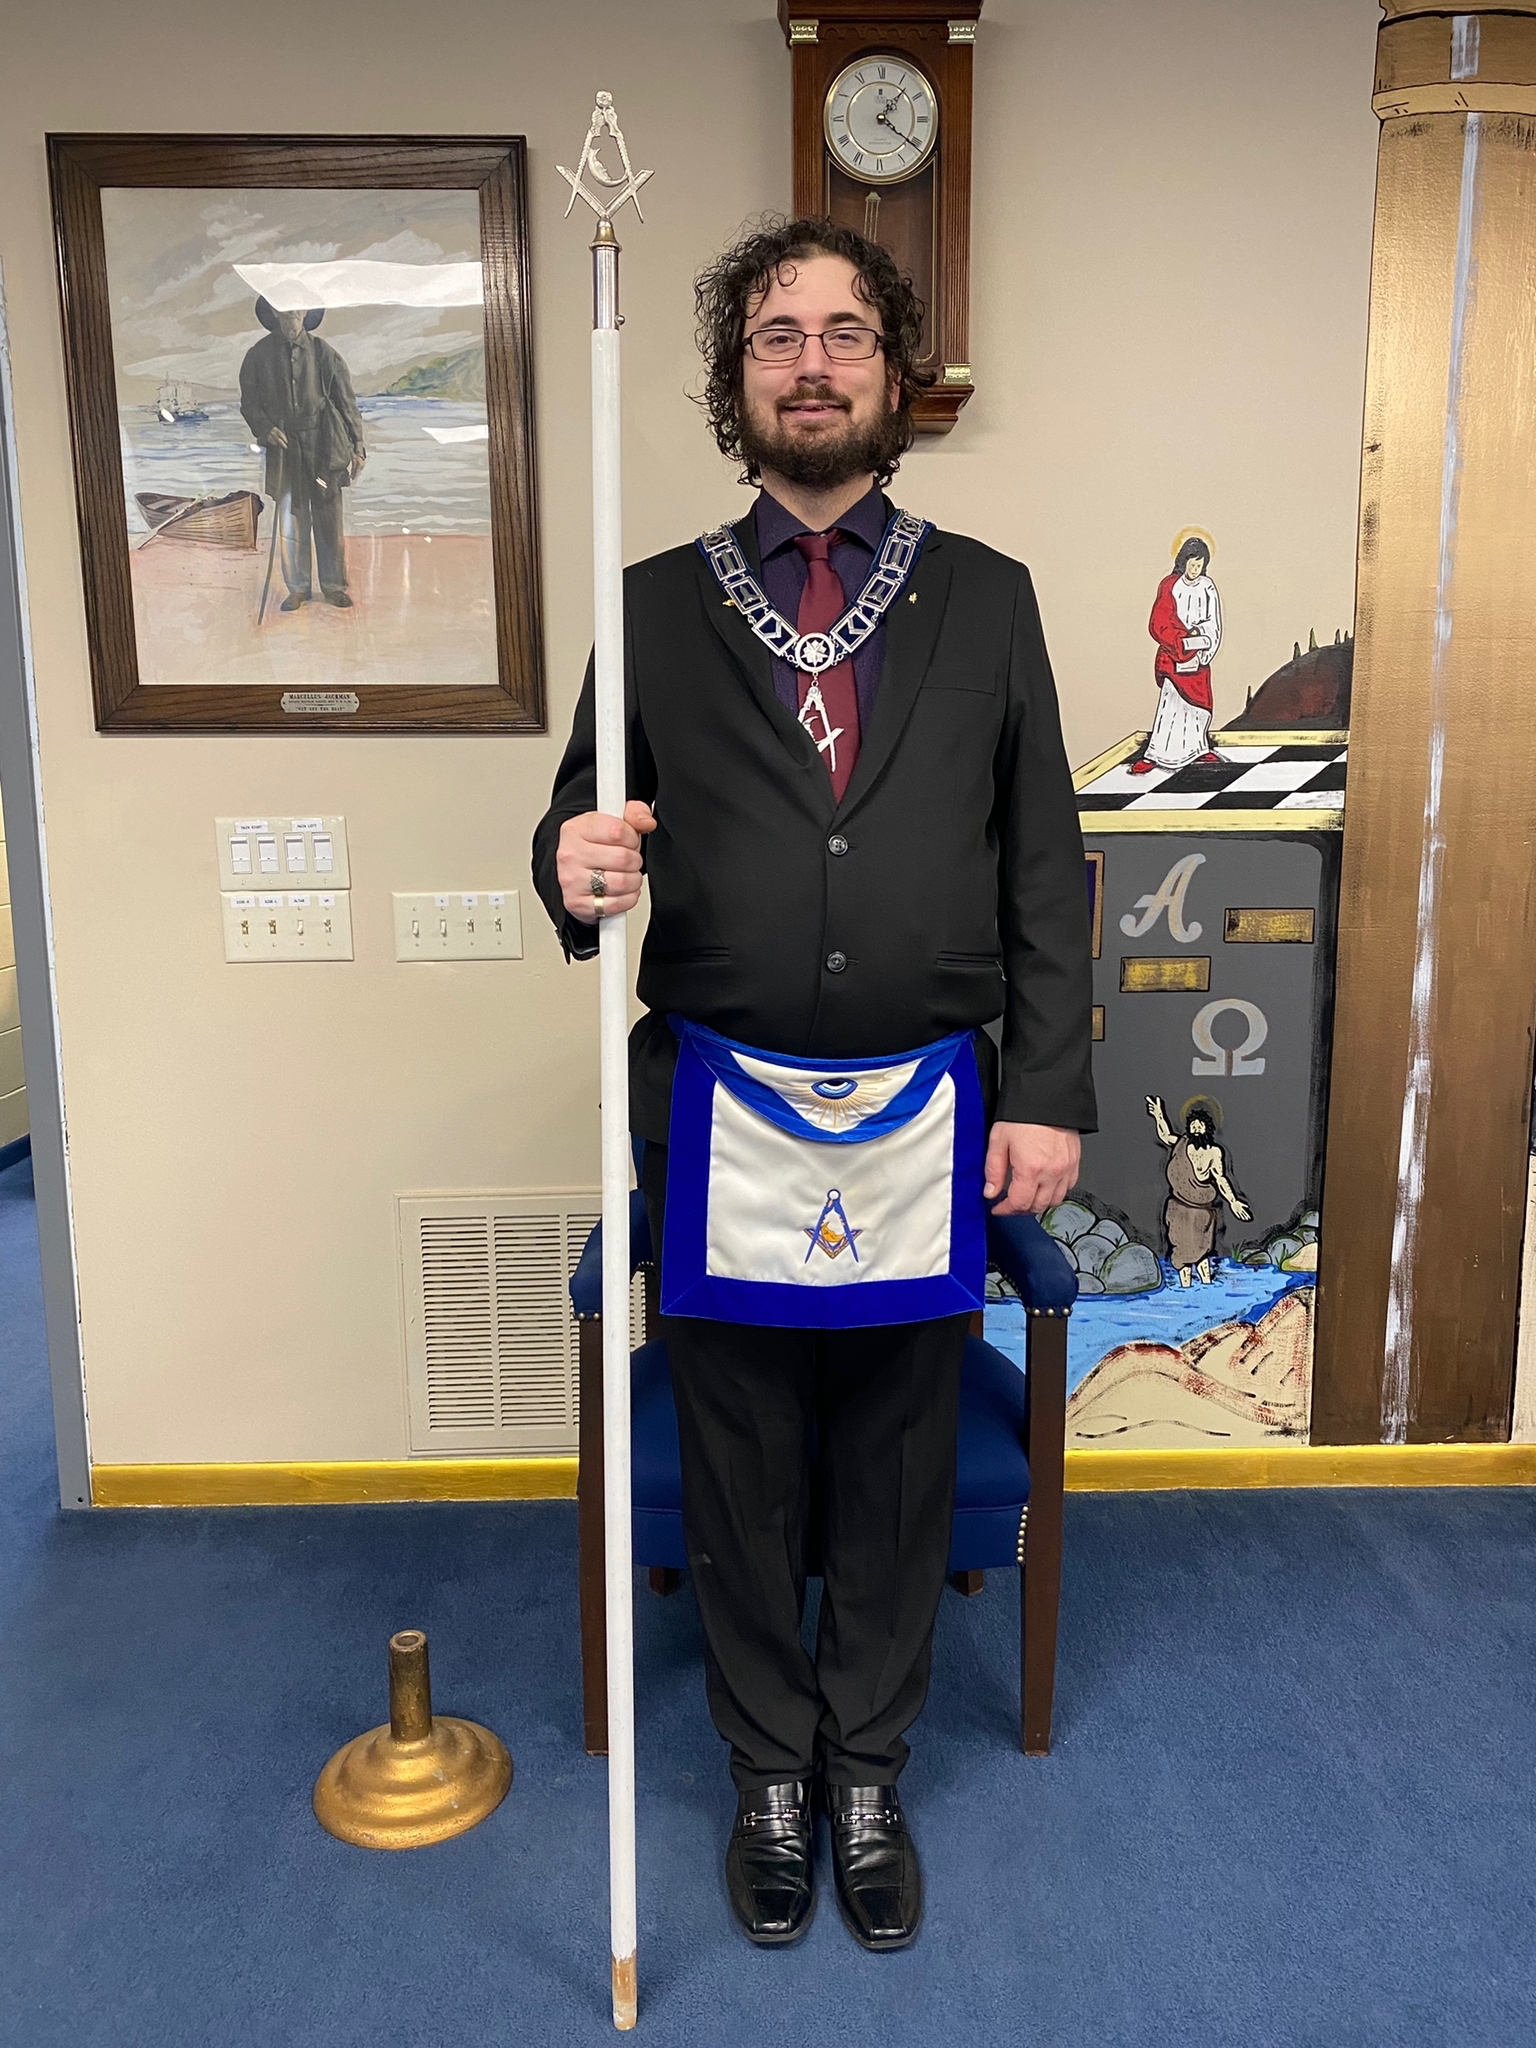 Junior Deacon of Broad Ripple Lodge holding his staff